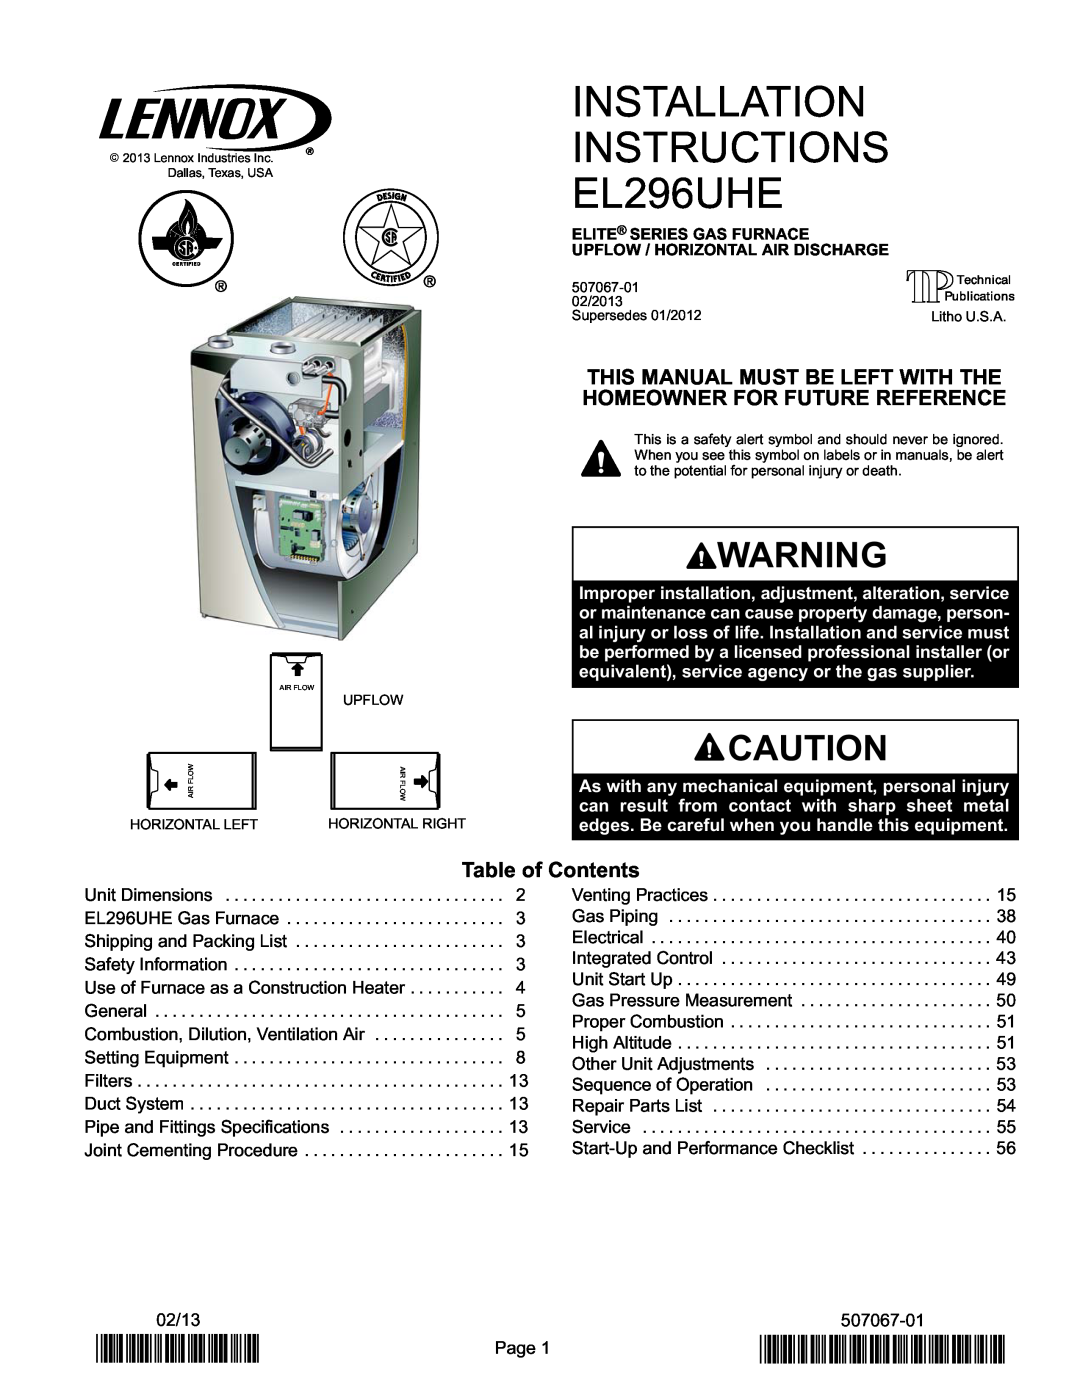 Lennox International Inc Elite Series Gas Furnace installation instructions Table of Contents, 2P0213, P507067-01 